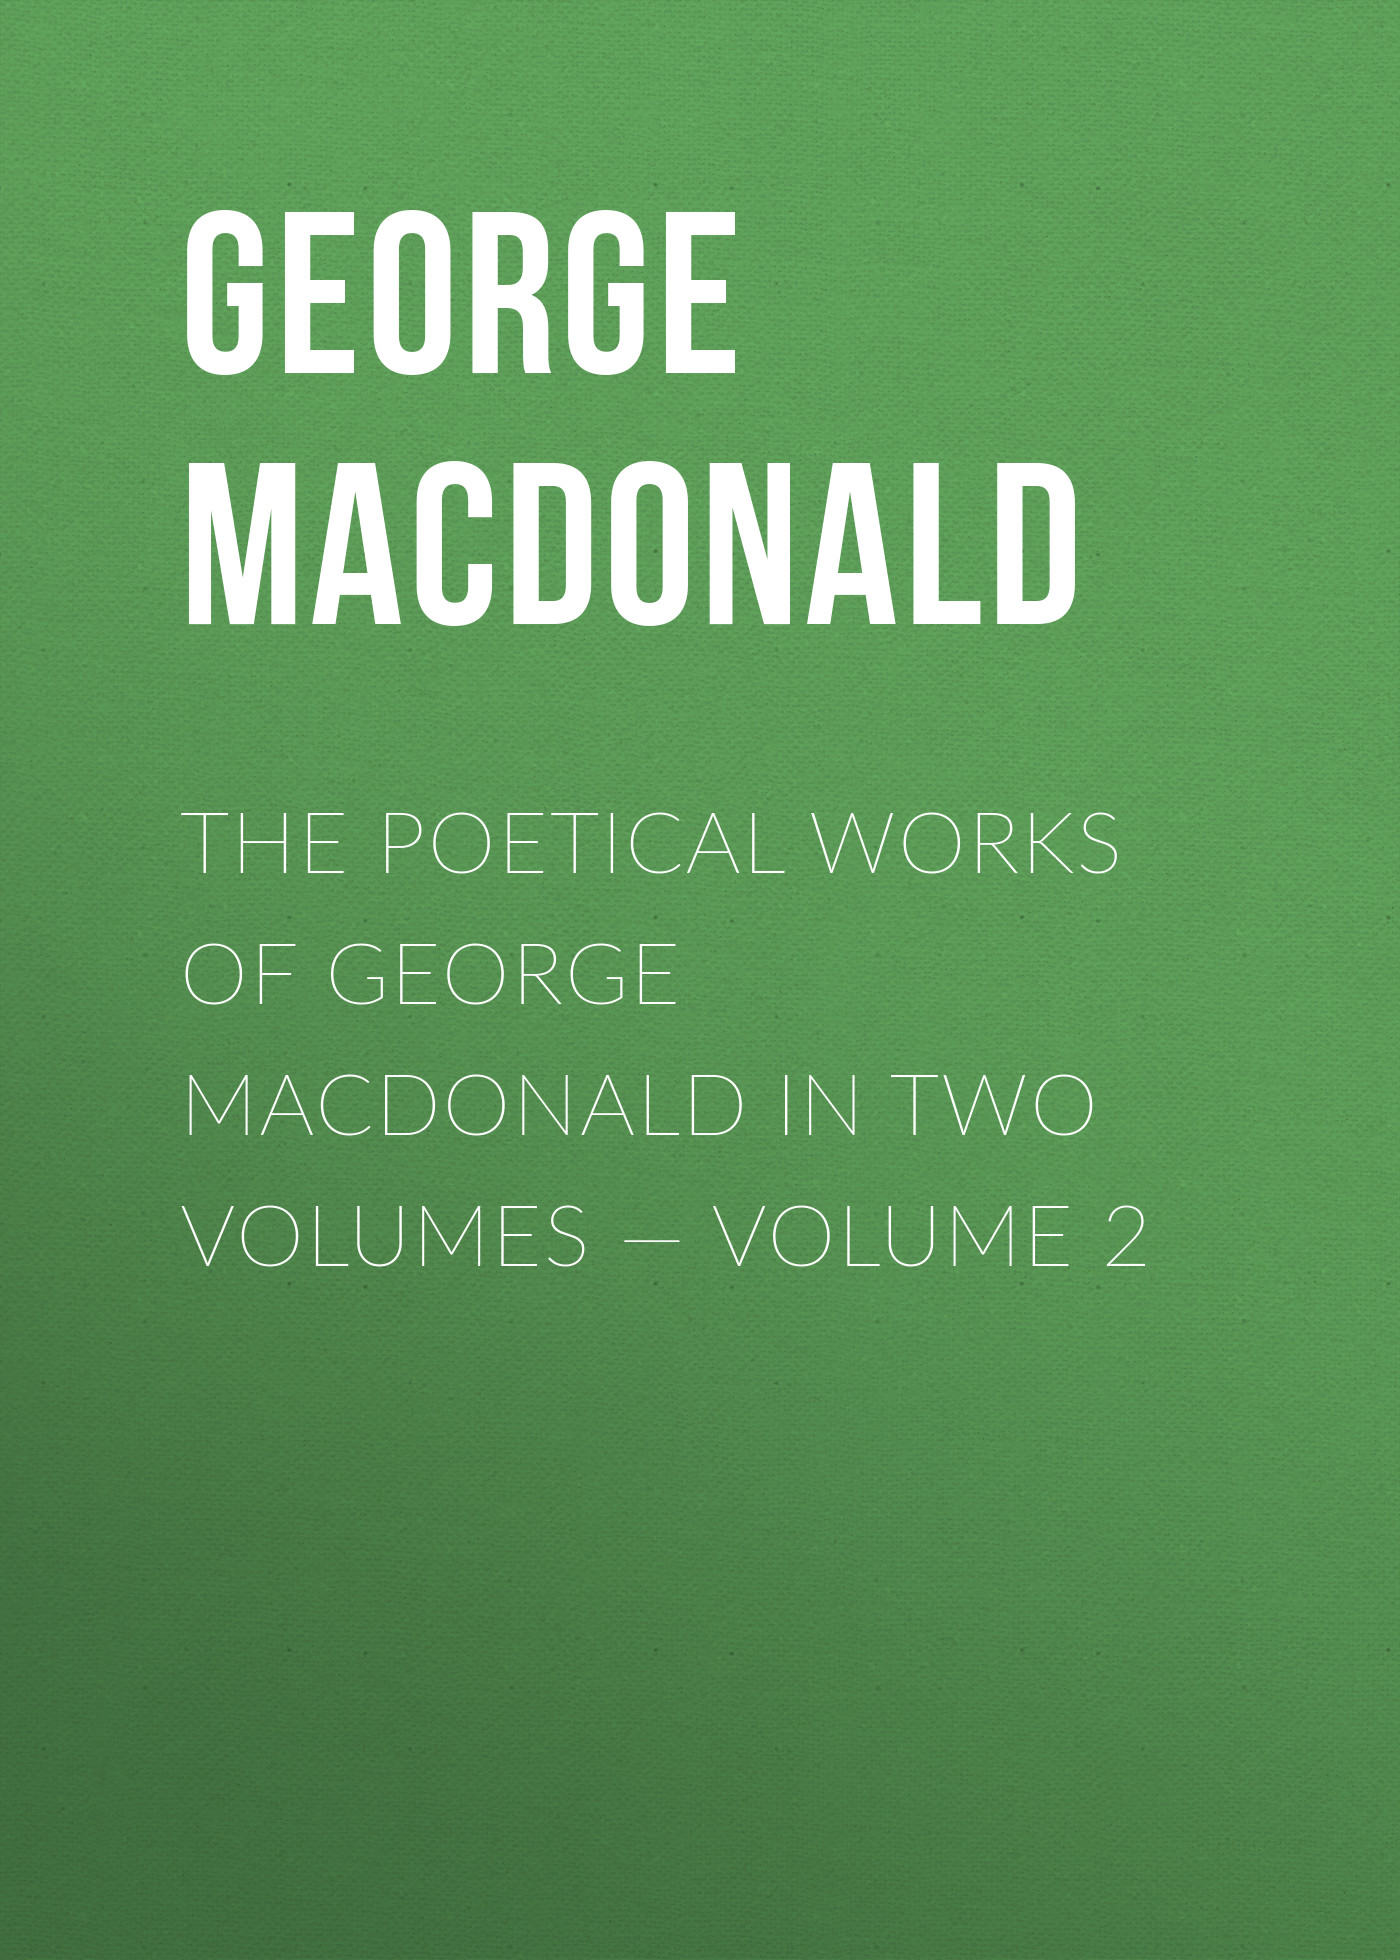 The poetical works of George MacDonald in two volumes— Volume 2